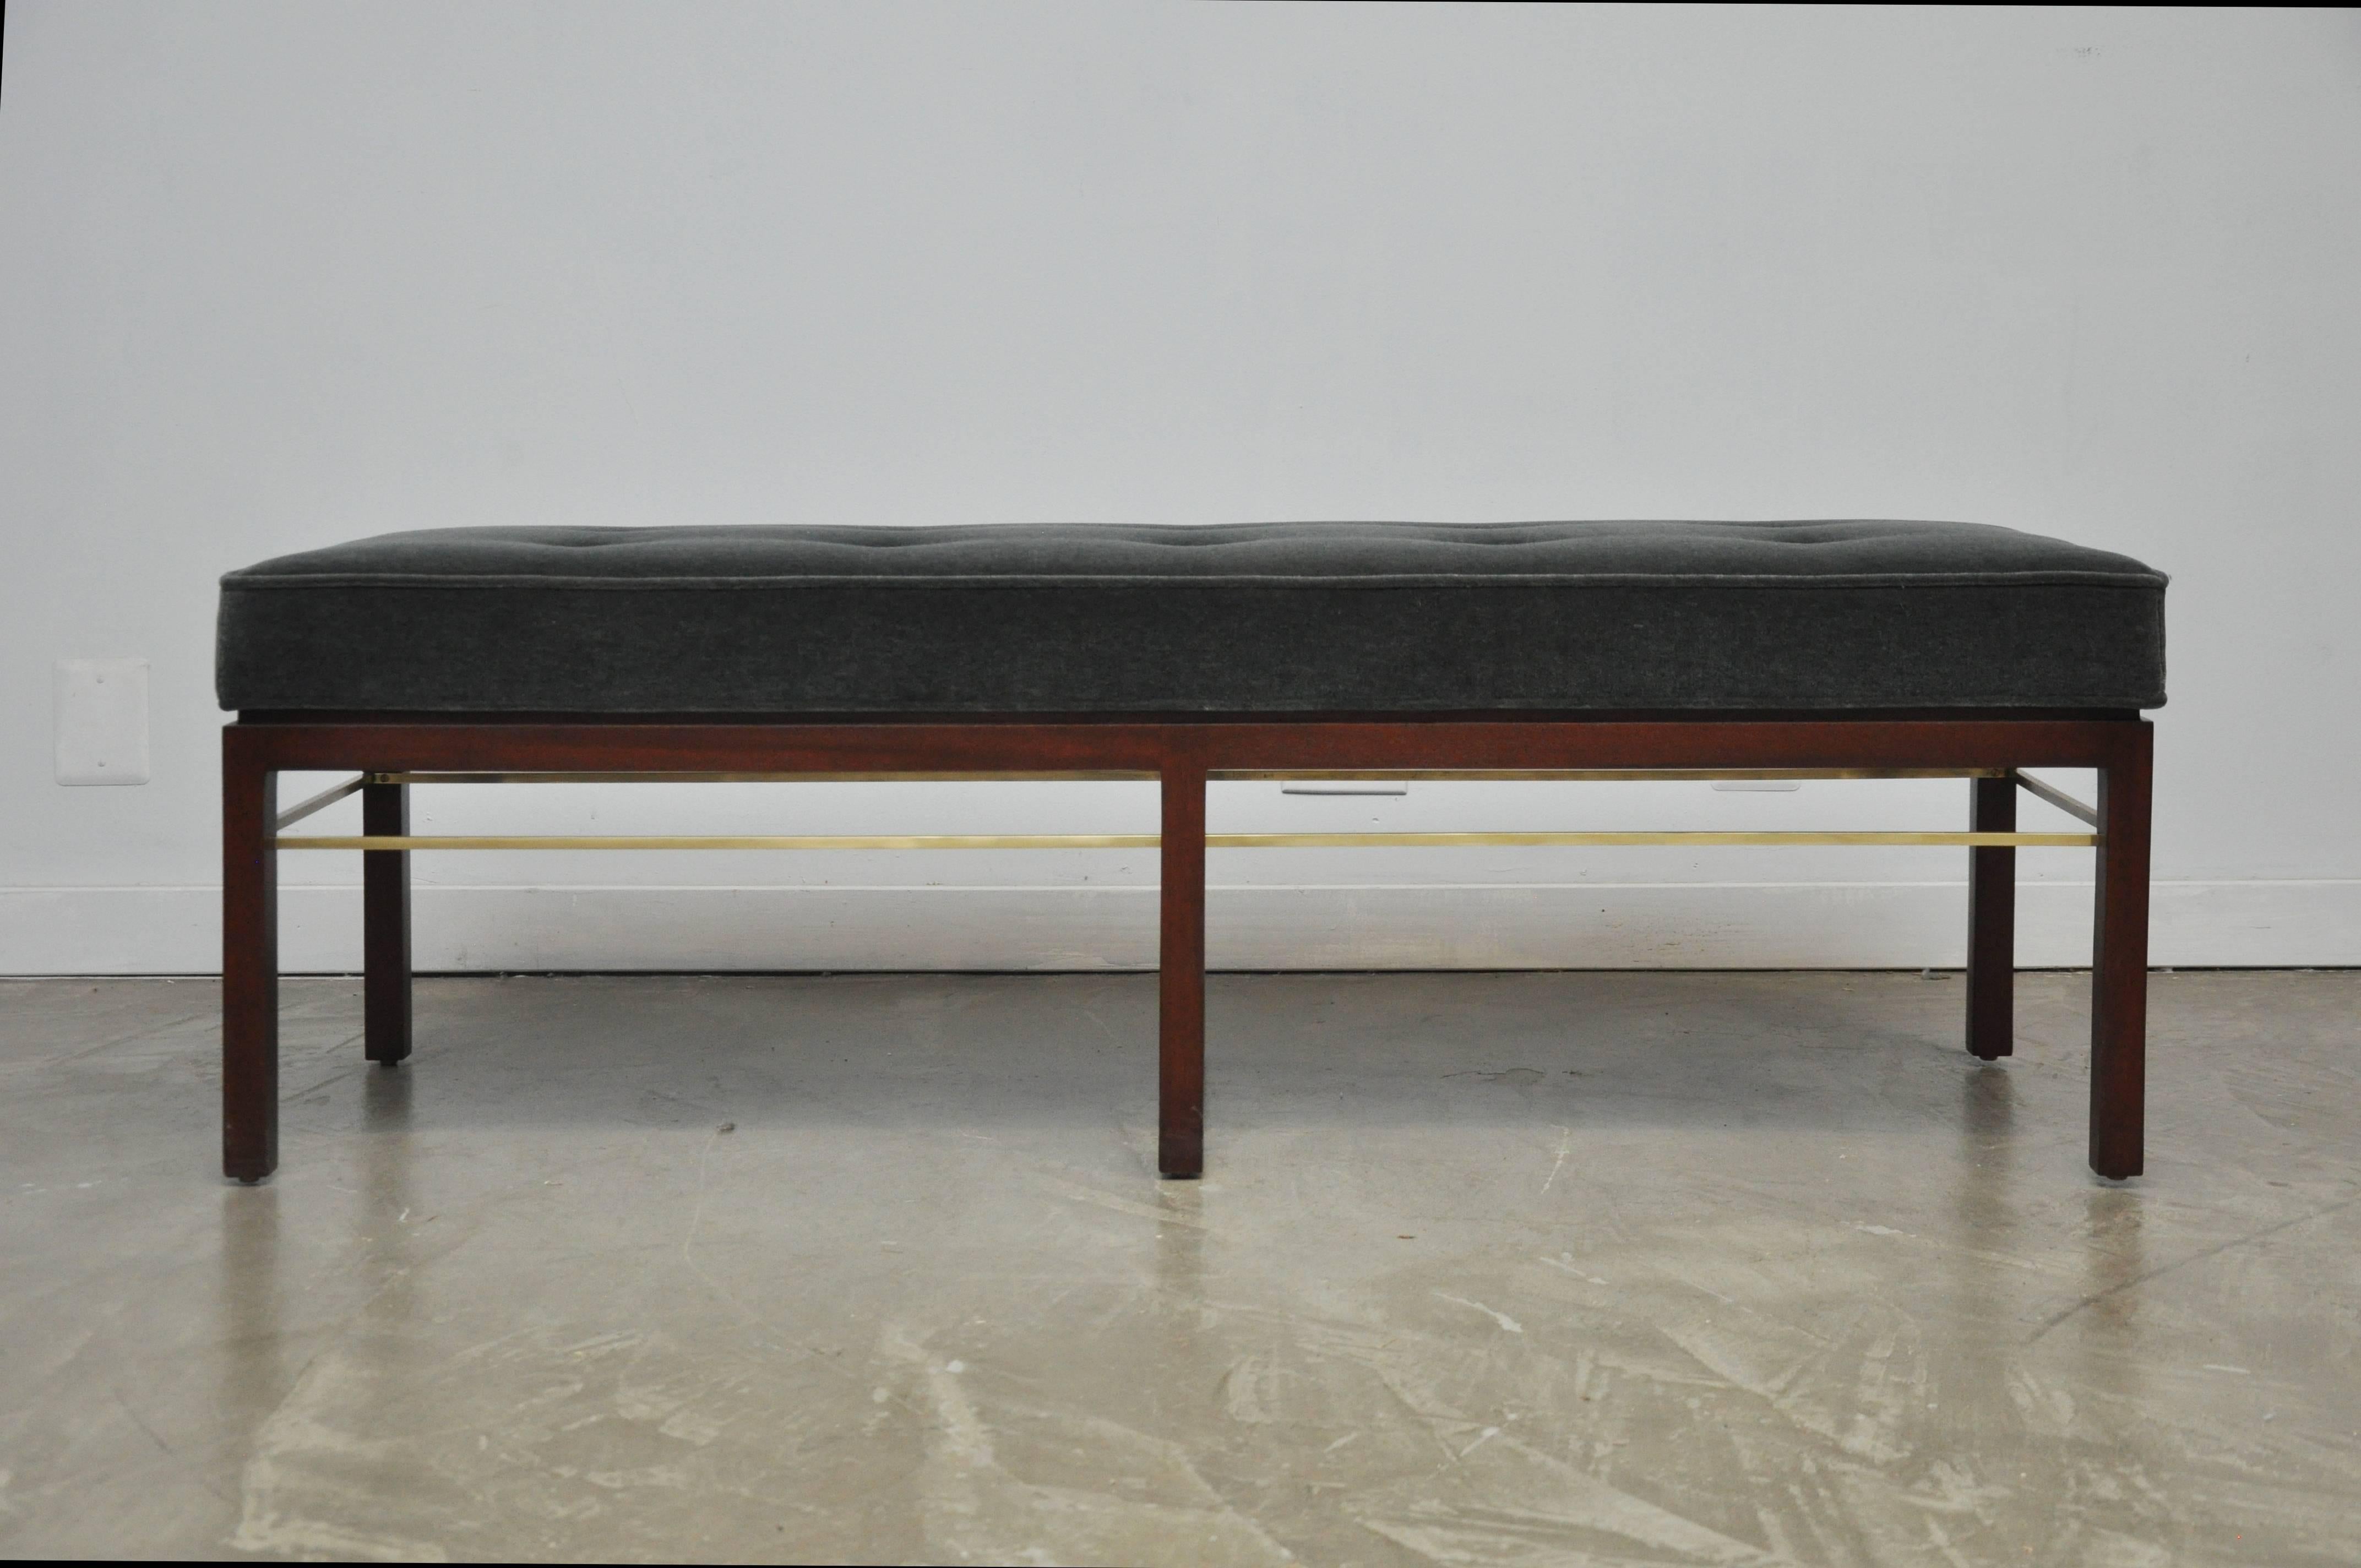 Beautiful bench by Edward Wormley for Dunbar. Fully restored mahogany frame in walnut finish. Polished brass stretcher around the interior of entire frame. New dark grey mohair upholstery.